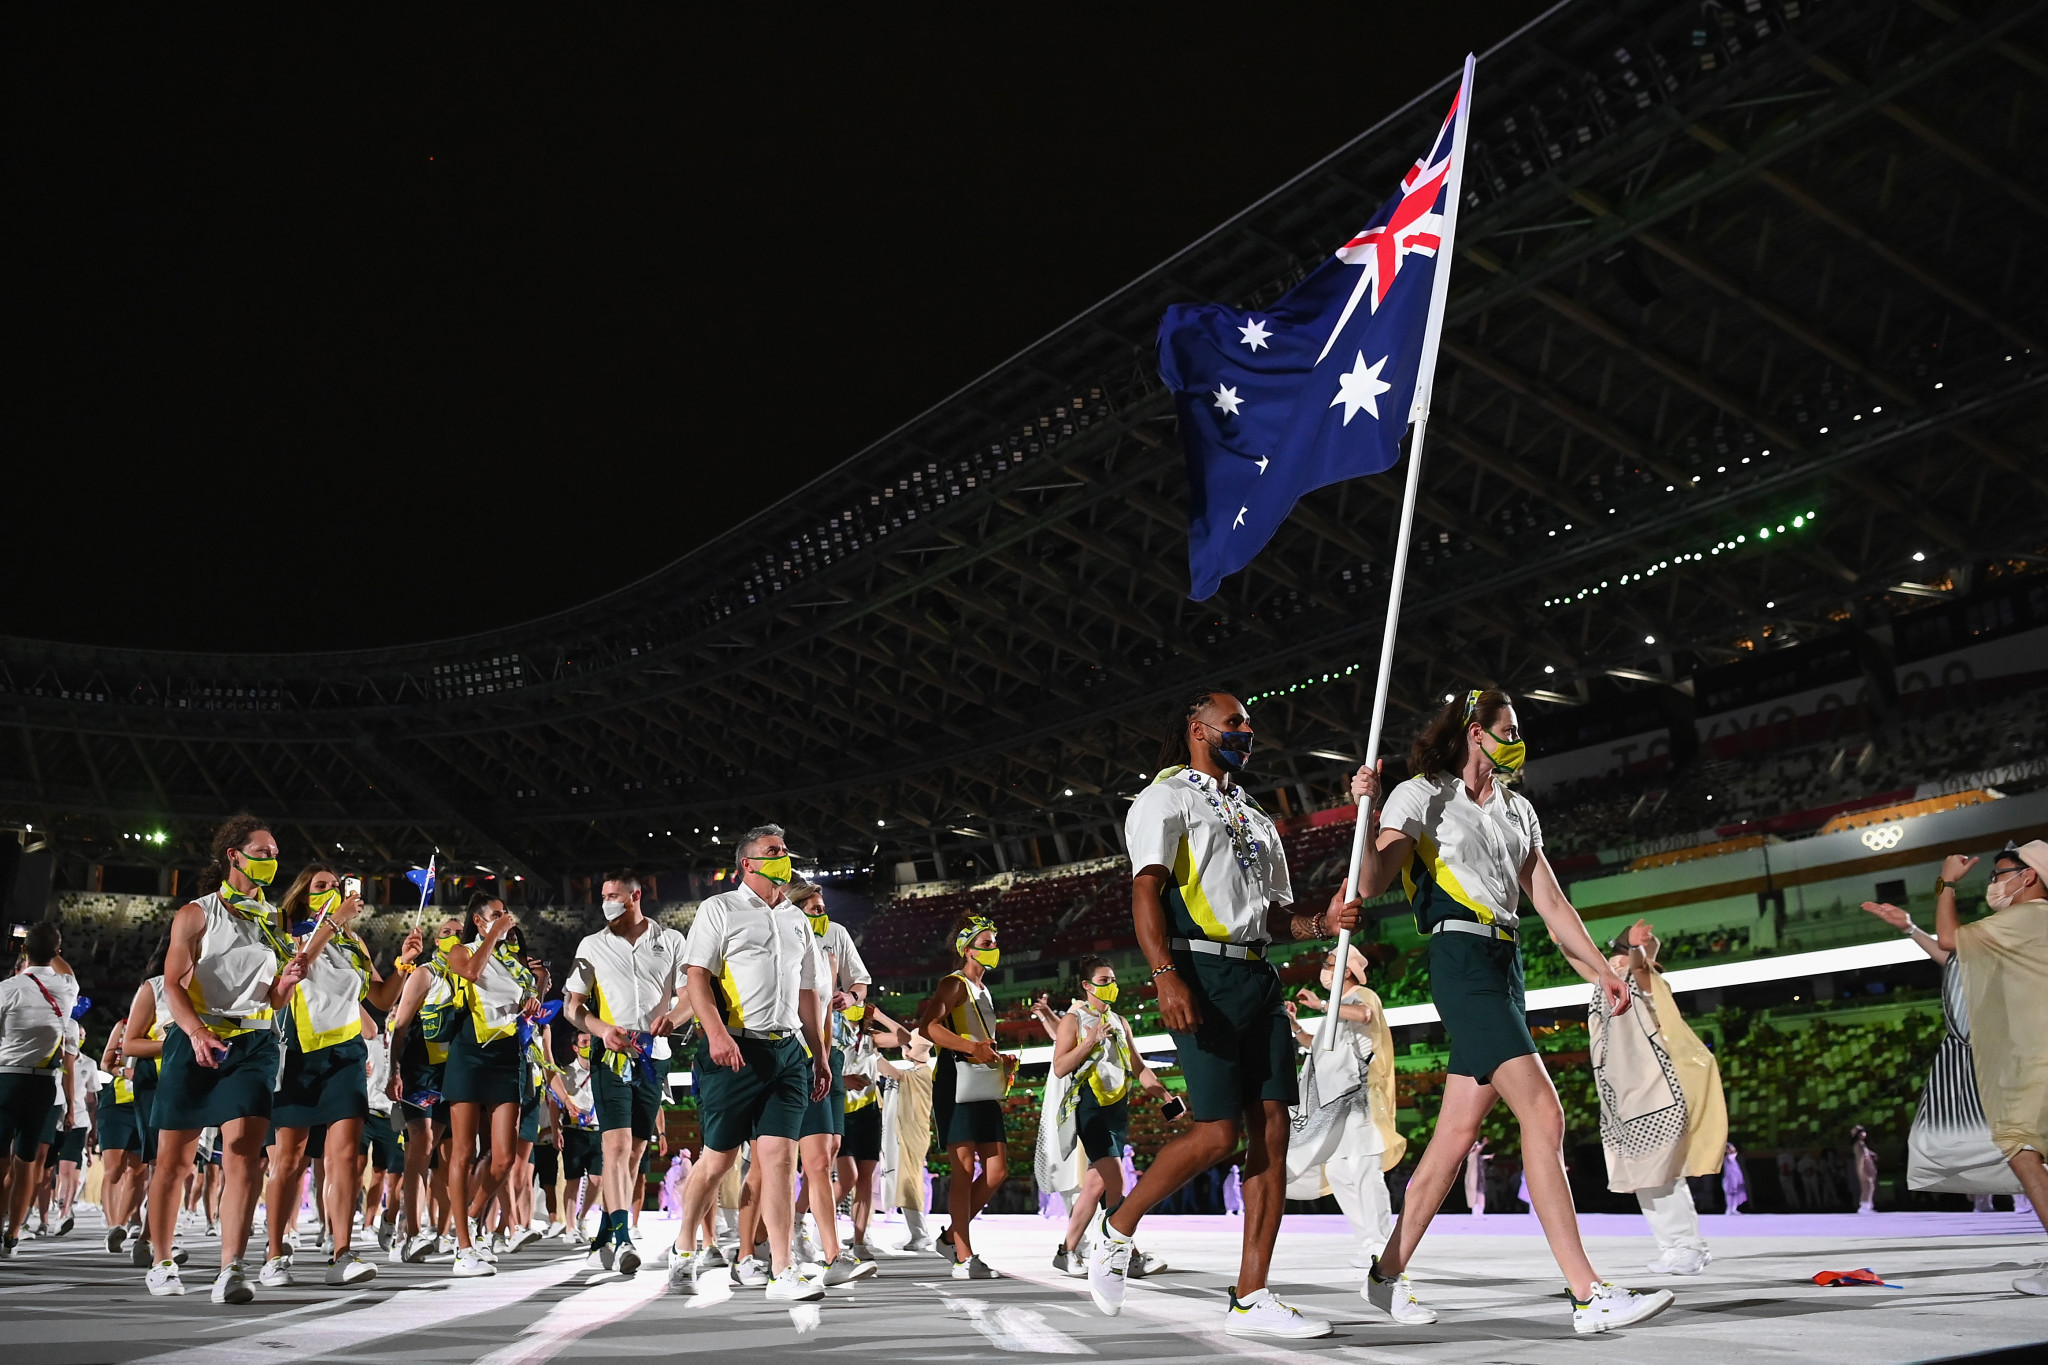 Retiring Australian athletes will not receive a medal bonus, but the AOC said its medal incentive programme "is far more generous and beneficial than any reward programme" ©Getty Images